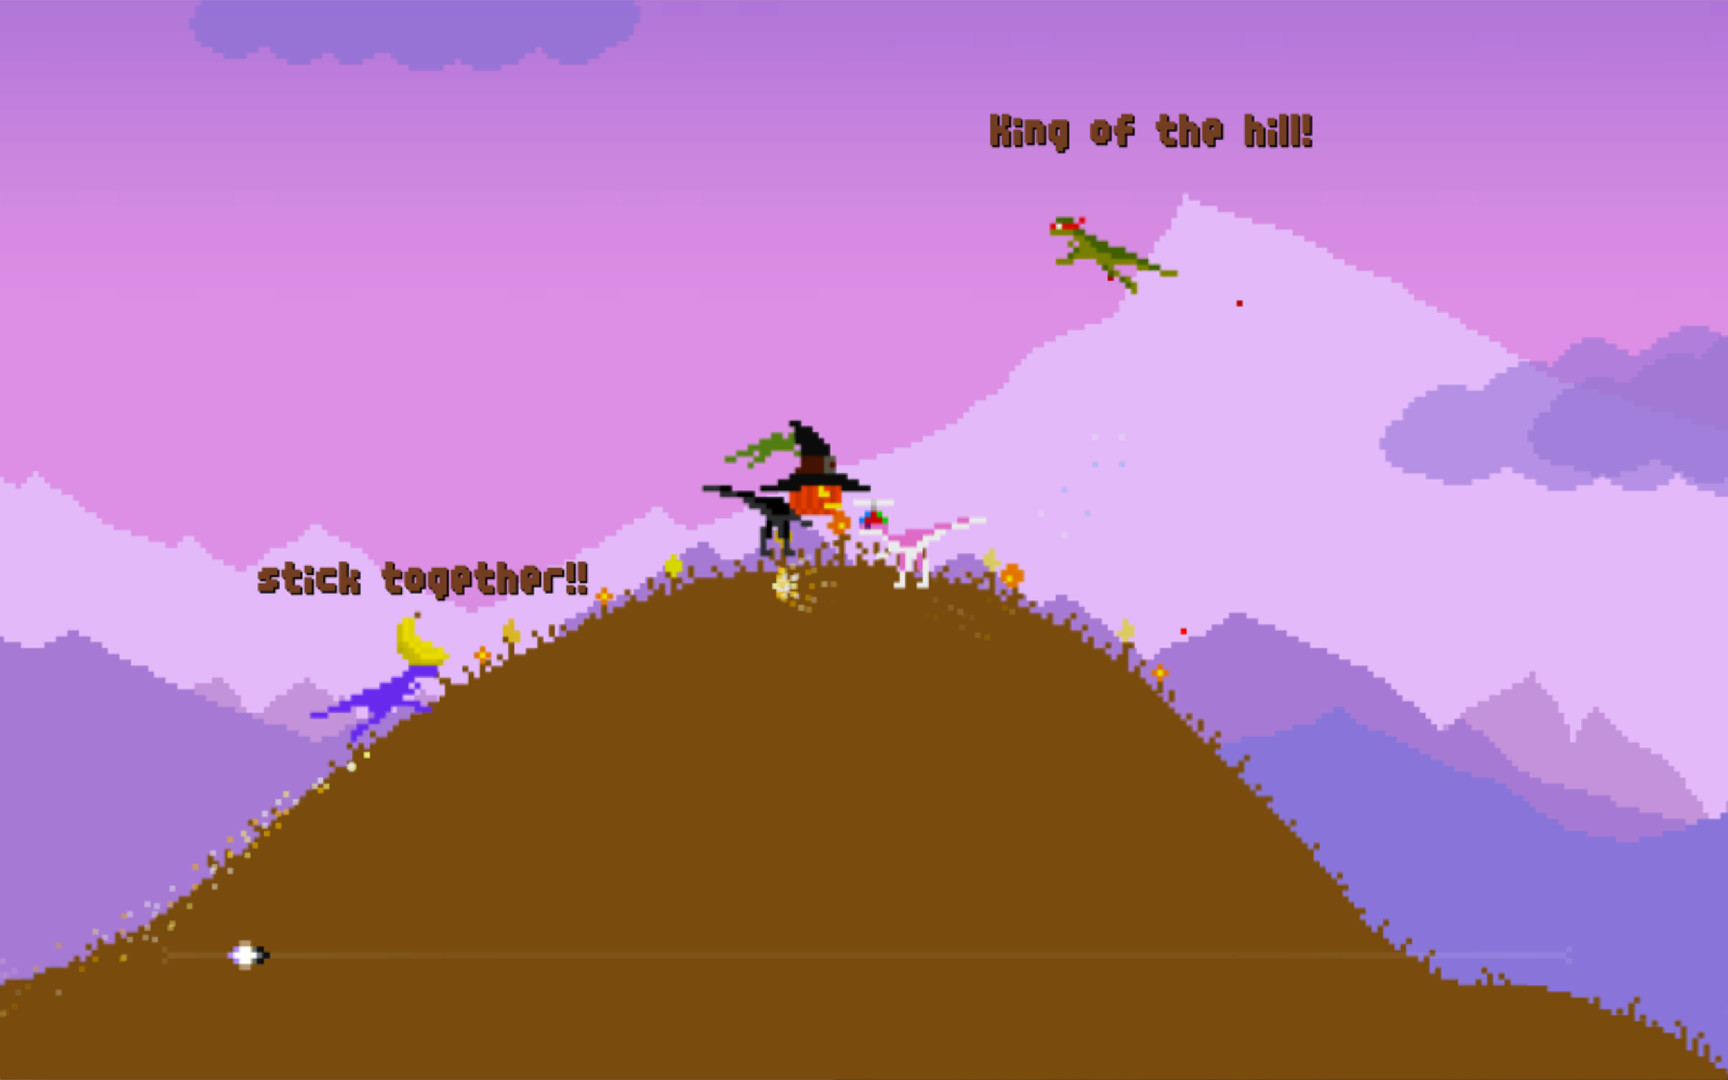 Run Dino Run  Play Now Online for Free 